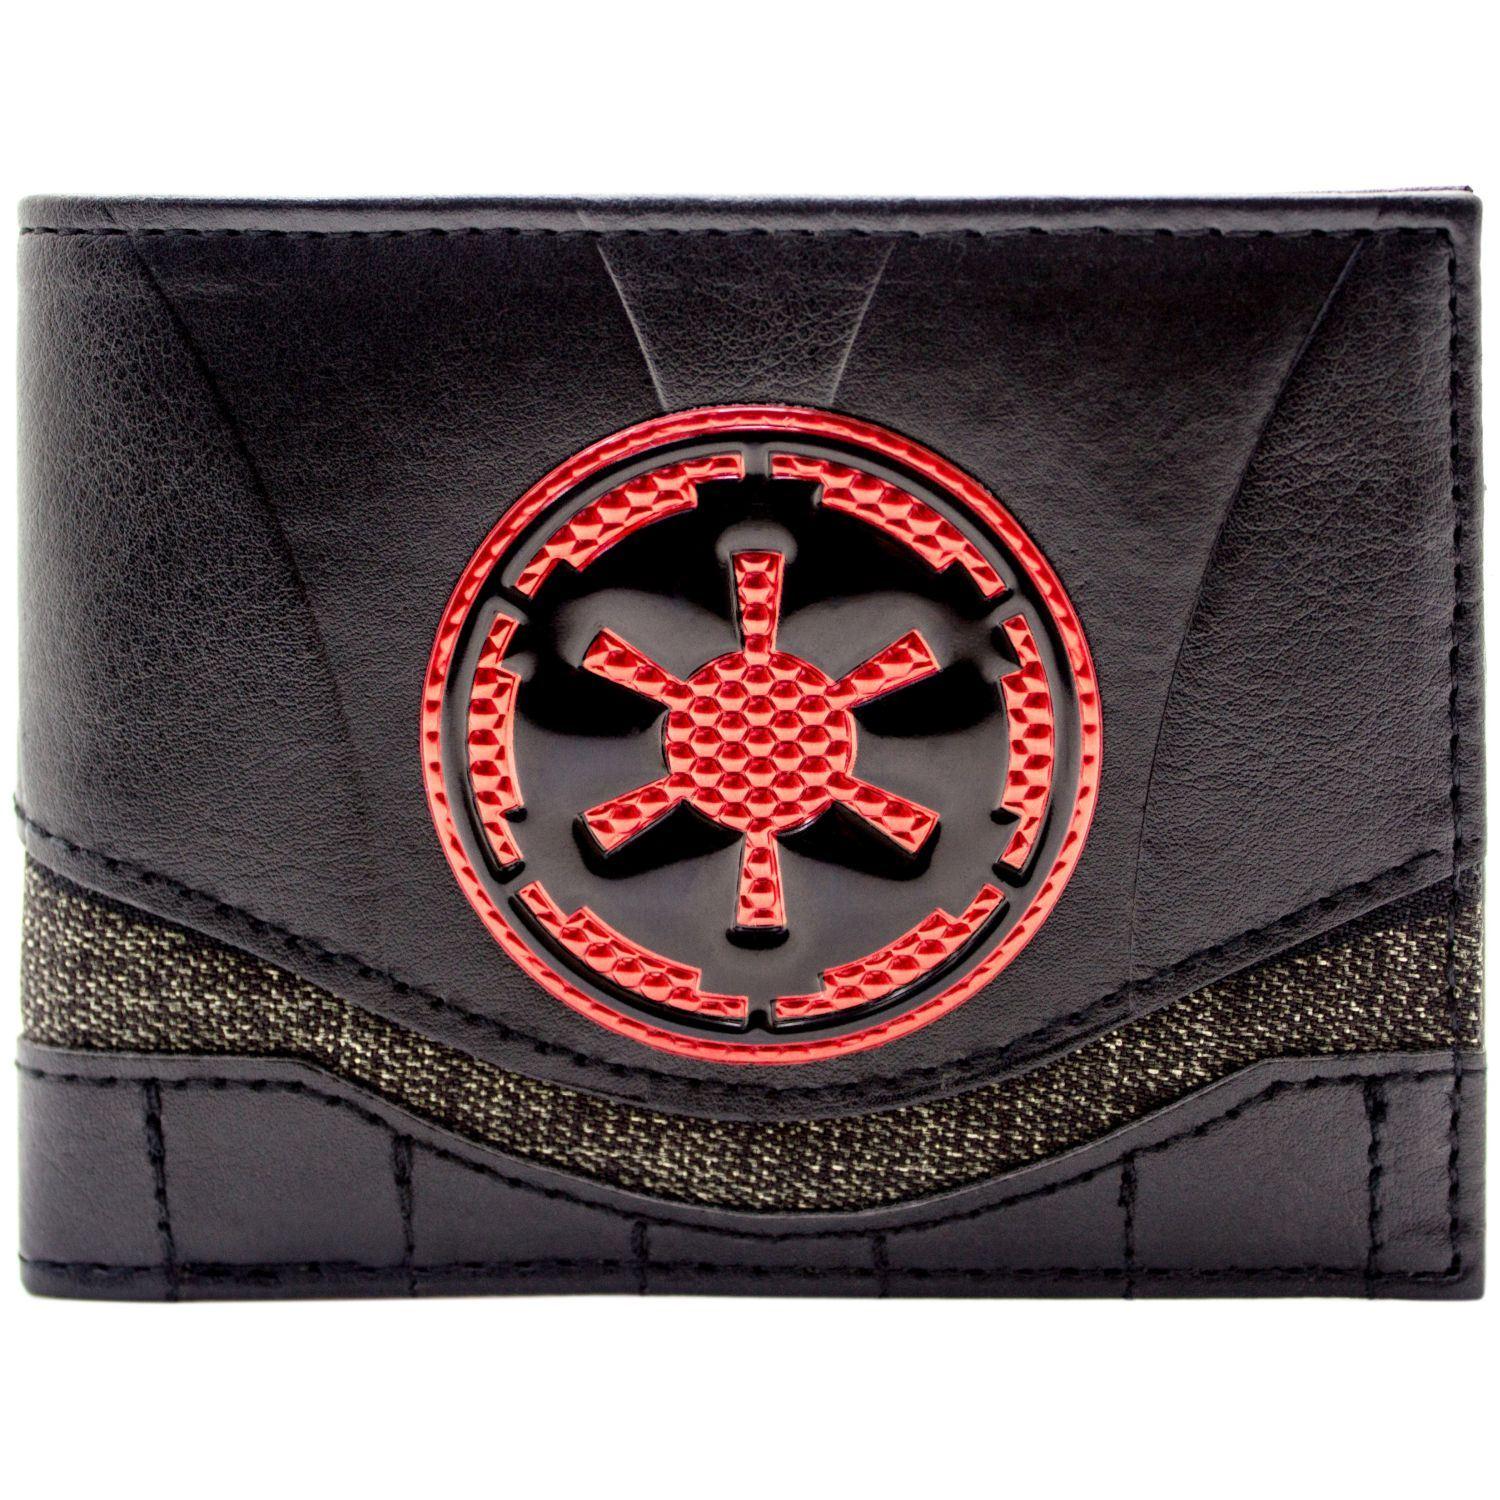 Imperial Logo - NEW OFFICIAL STAR WARS RED IMPERIAL LOGO RED ID & CARD BI-FOLD ...